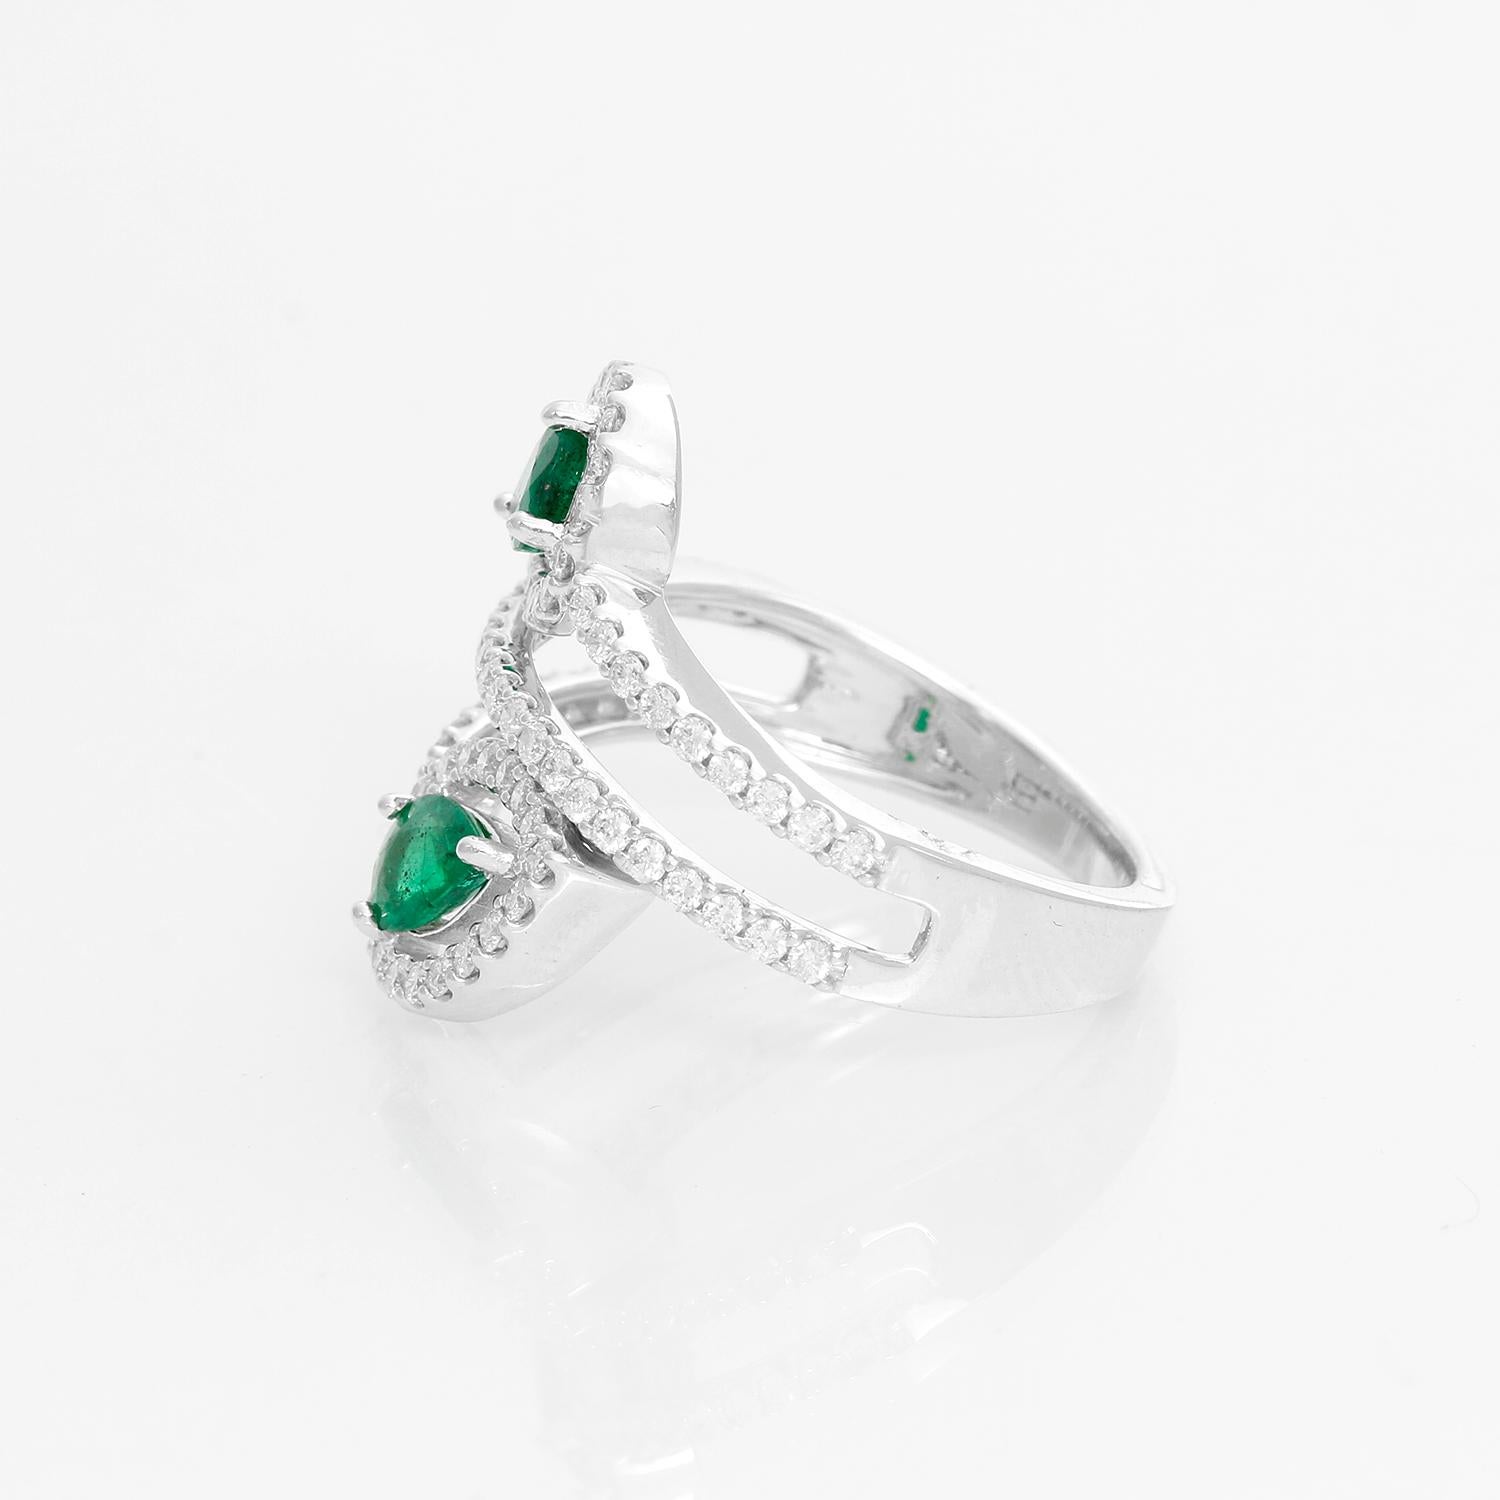 Dual Pear Emerald 14K White Gold Ring Size 7  - This charming composition balances a pair of pear-shaped color stones along detailed diamond accents at every glance. Weighing  0.68 cts of  Emerald pear-shaped stone suspended by diamond halo. Total